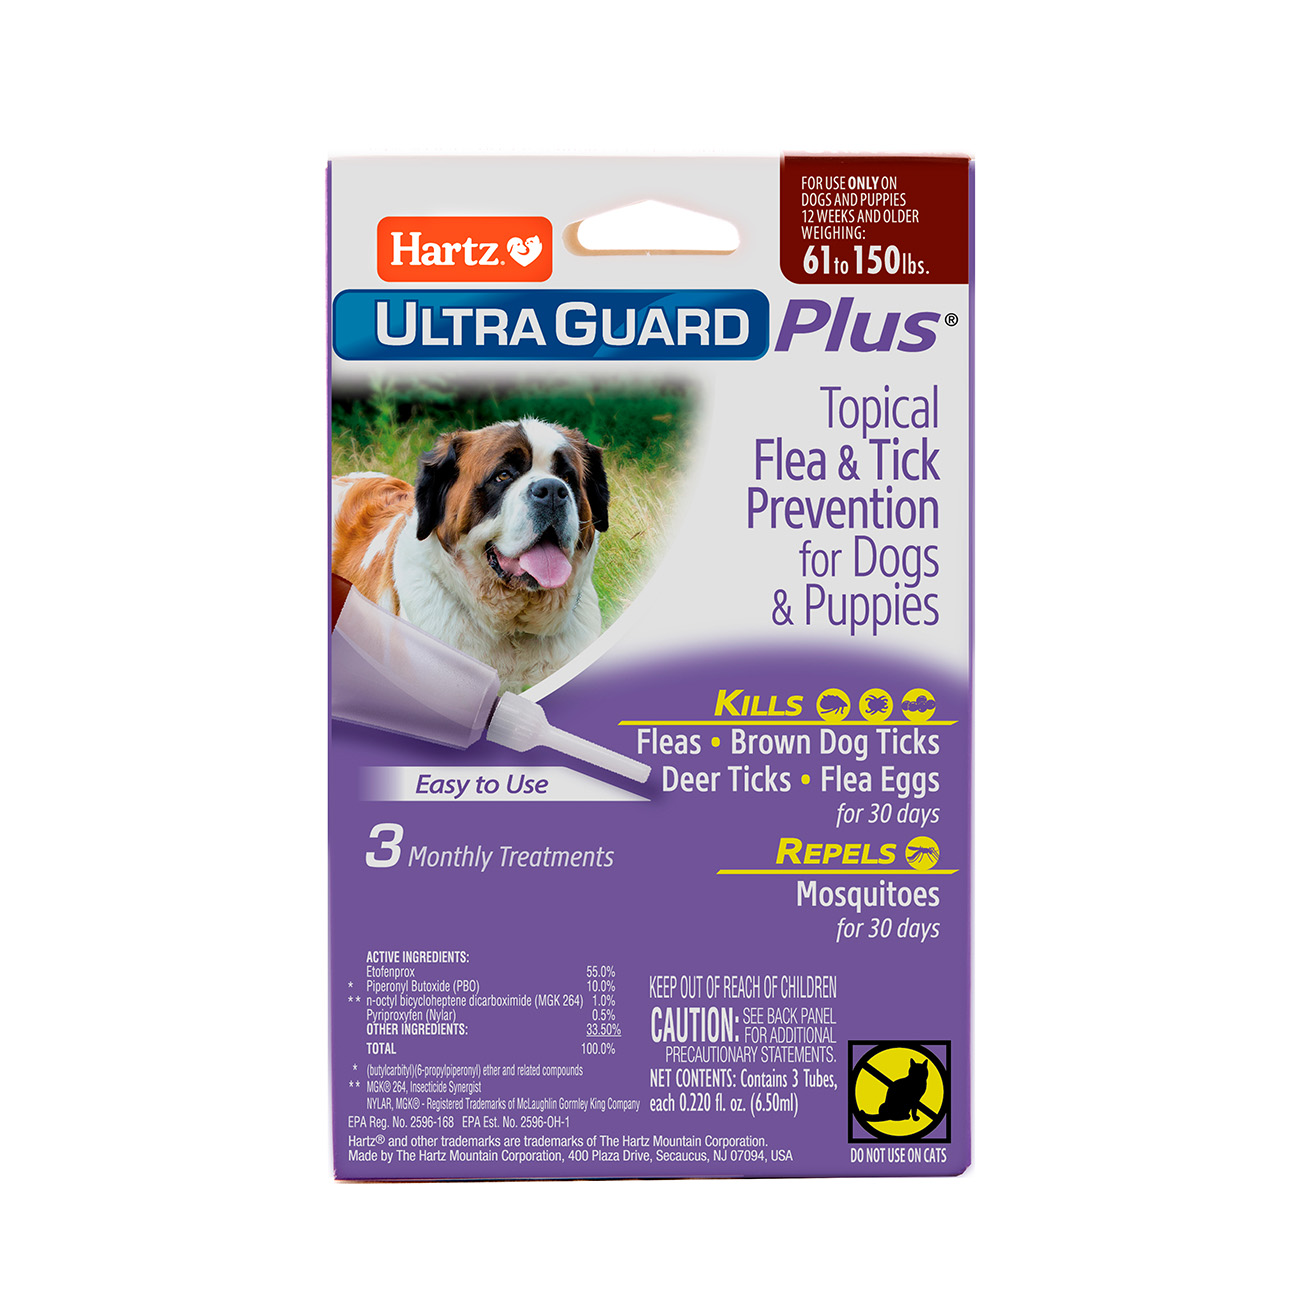 Hartz® UltraGuard Plus® Topical Flea and Tick Prevention for Dogs